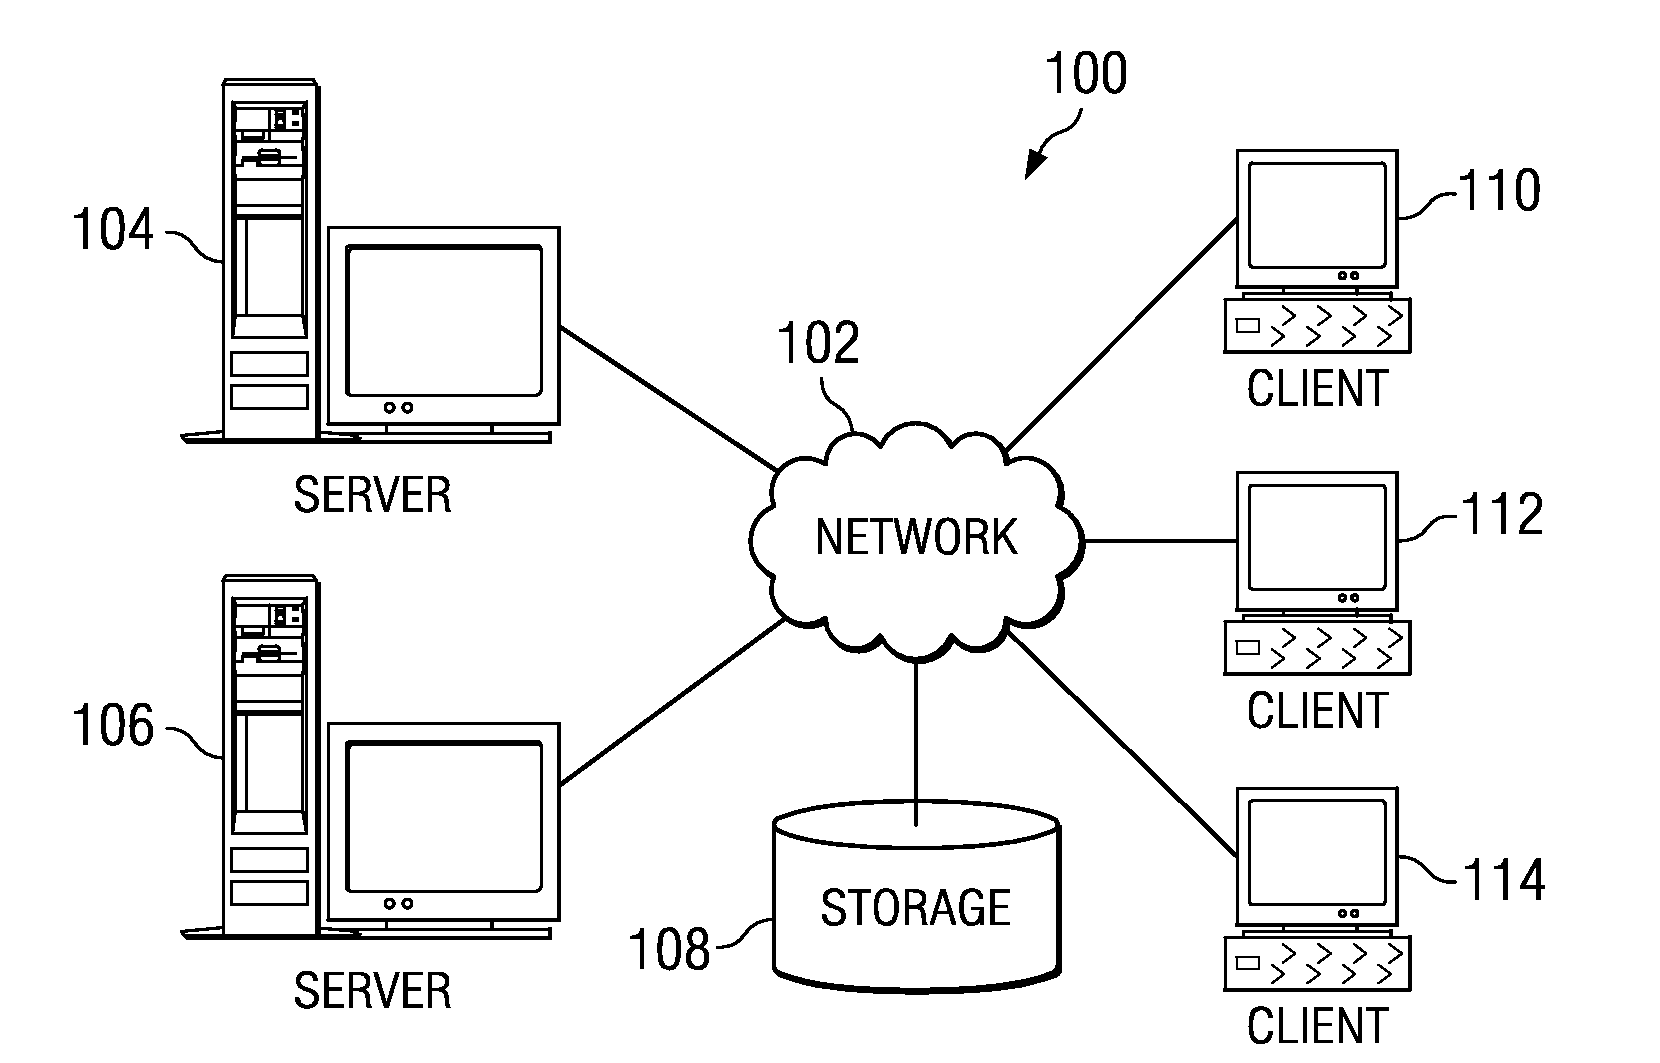 File Fragment Trading Based on Rarity Values in a Segmented File Sharing System